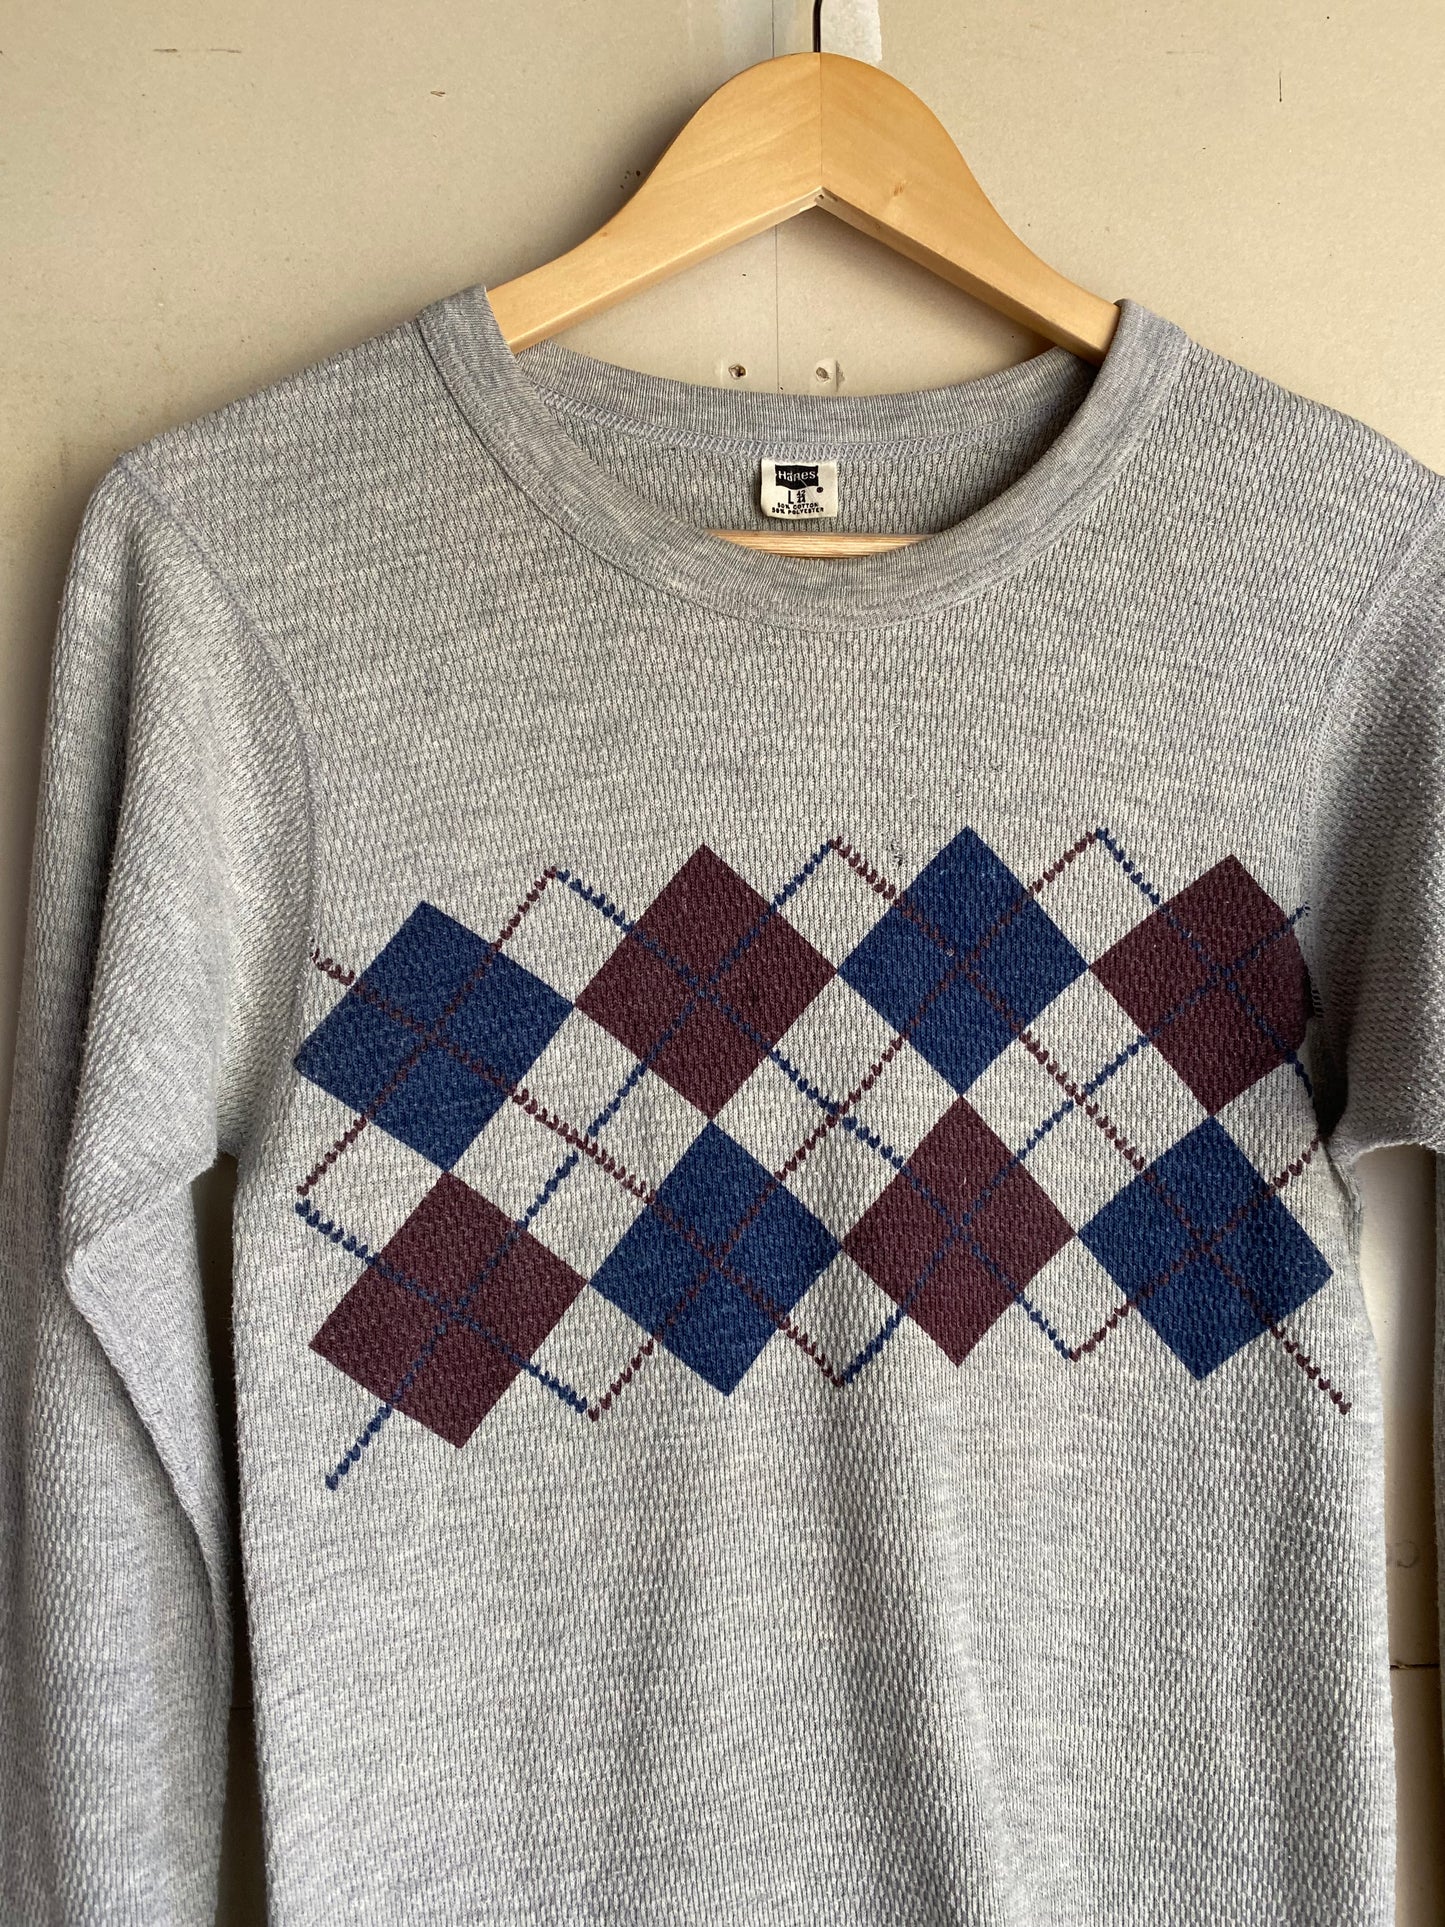 1970s Patterned Thermal | M